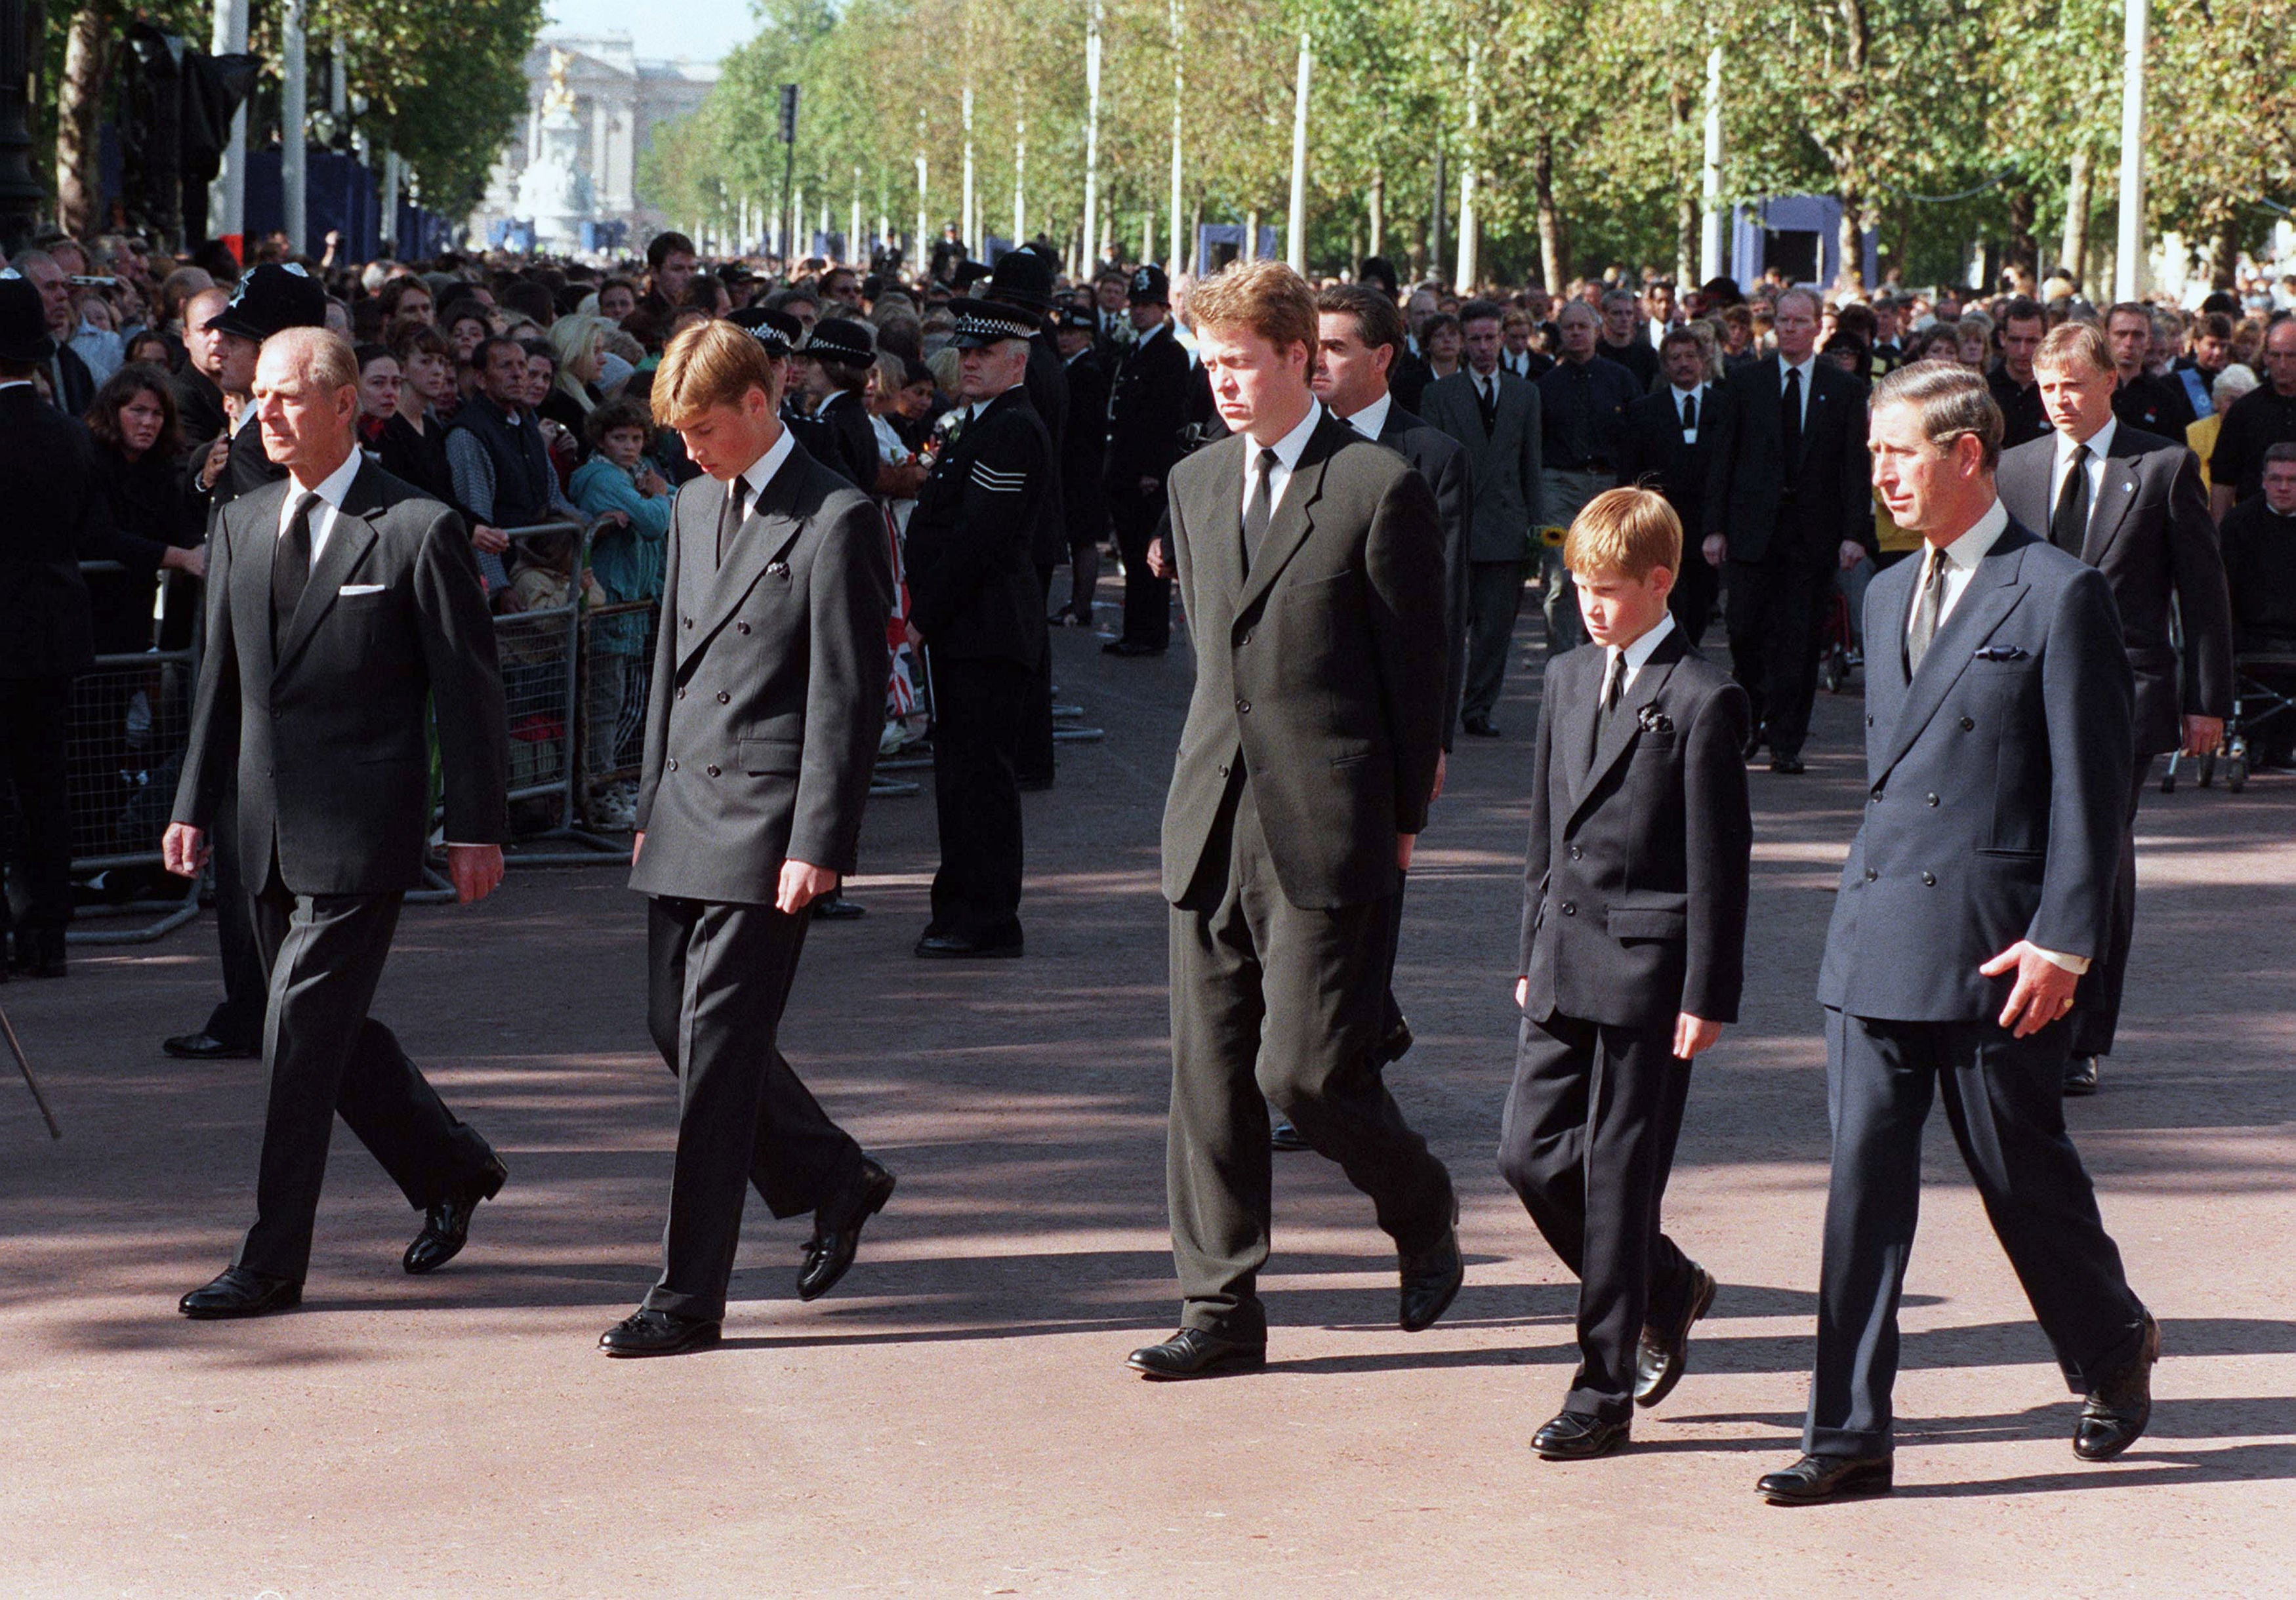 Family members followed behind Princess Diana’s coffin